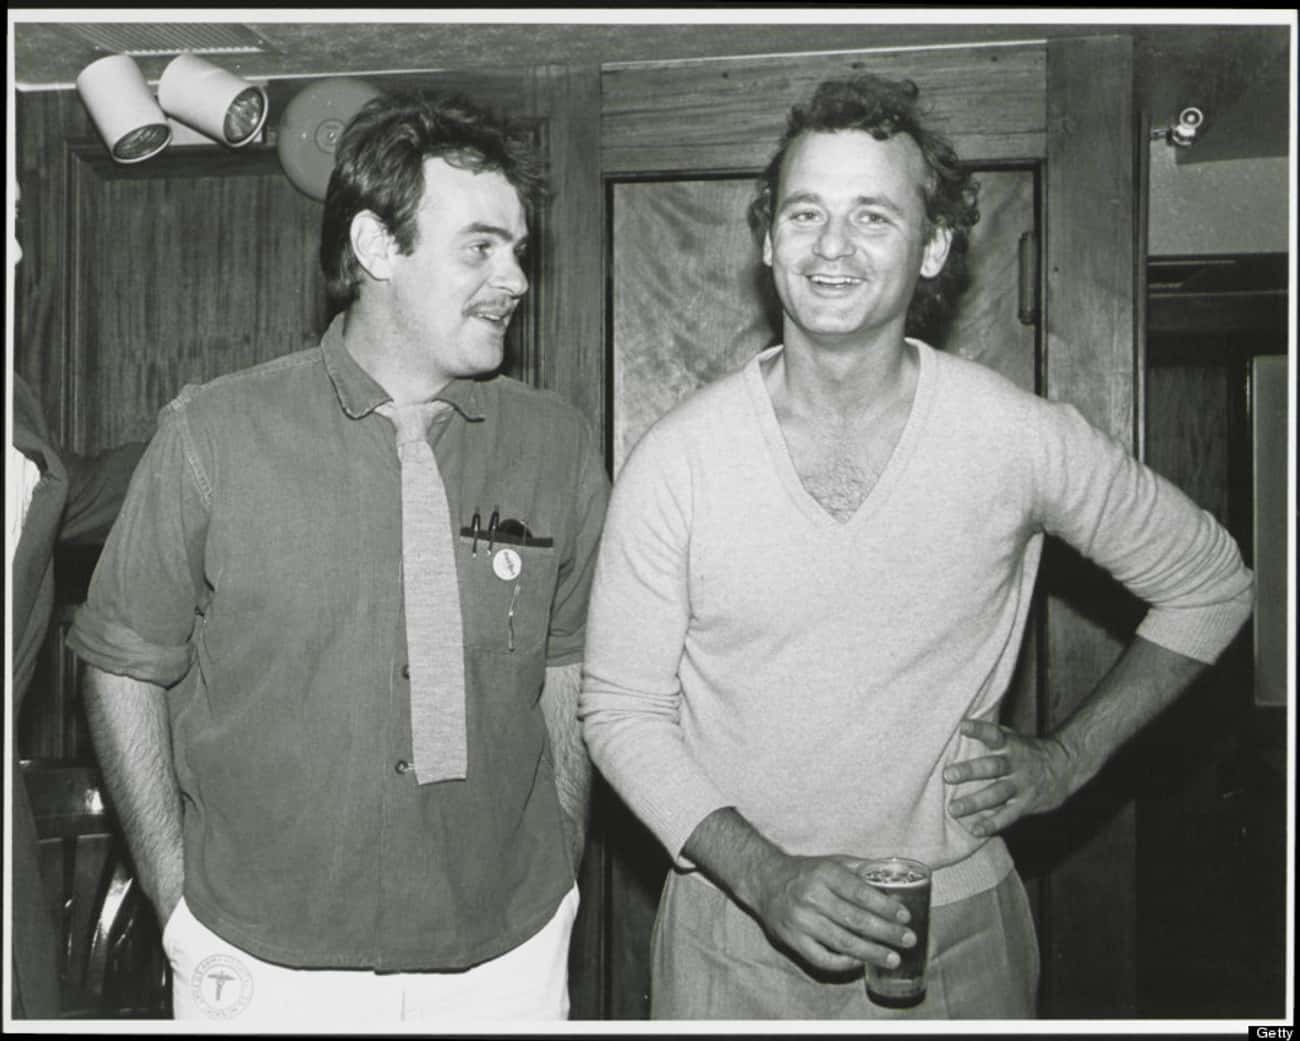 Young Bill Murray in a White V-Neck T-Shirt